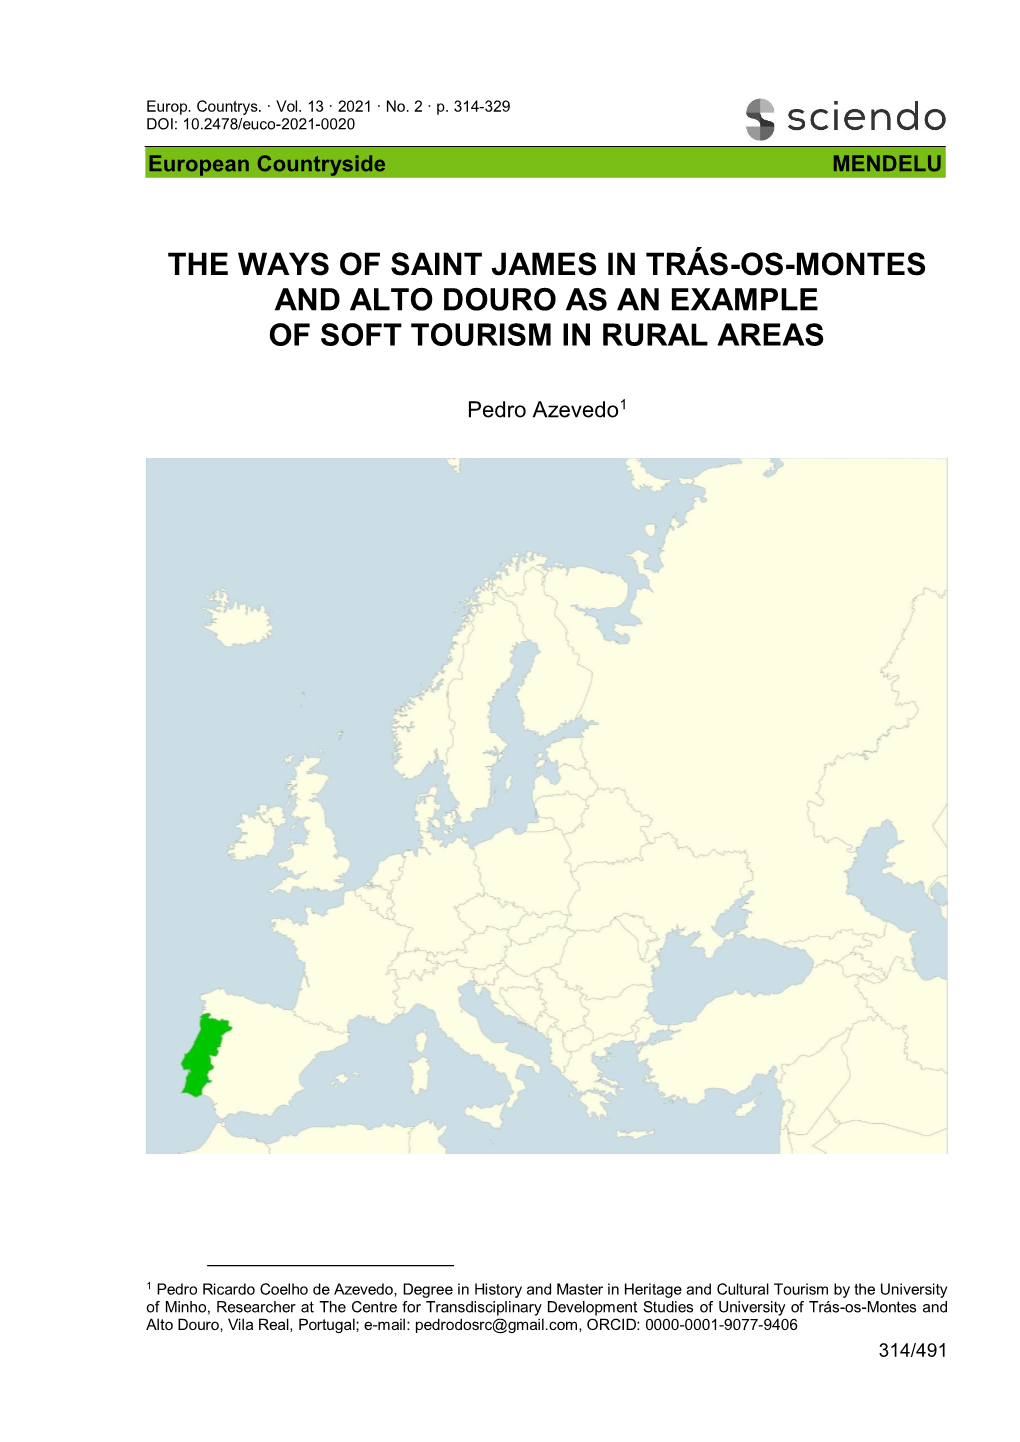 The Ways of Saint James in Trás-Os-Montes and Alto Douro As an Example of Soft Tourism in Rural Areas